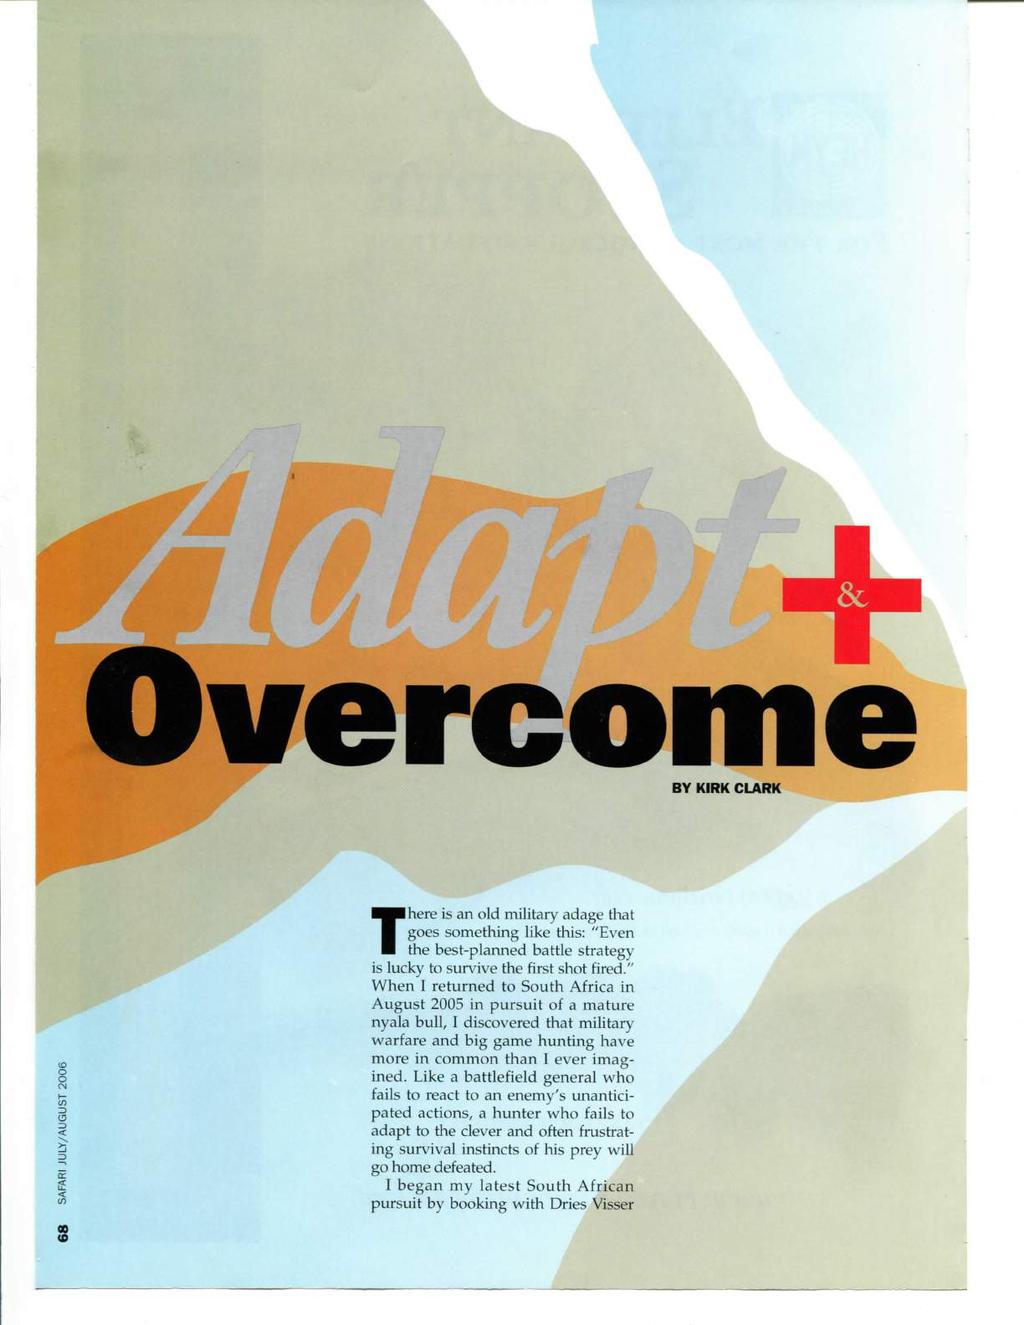 Overcome BY KIRK CLARK a < s There is an old military adage that goes something like this: "Even the best-planned battle strategy is lucky to survive the first shot fired.